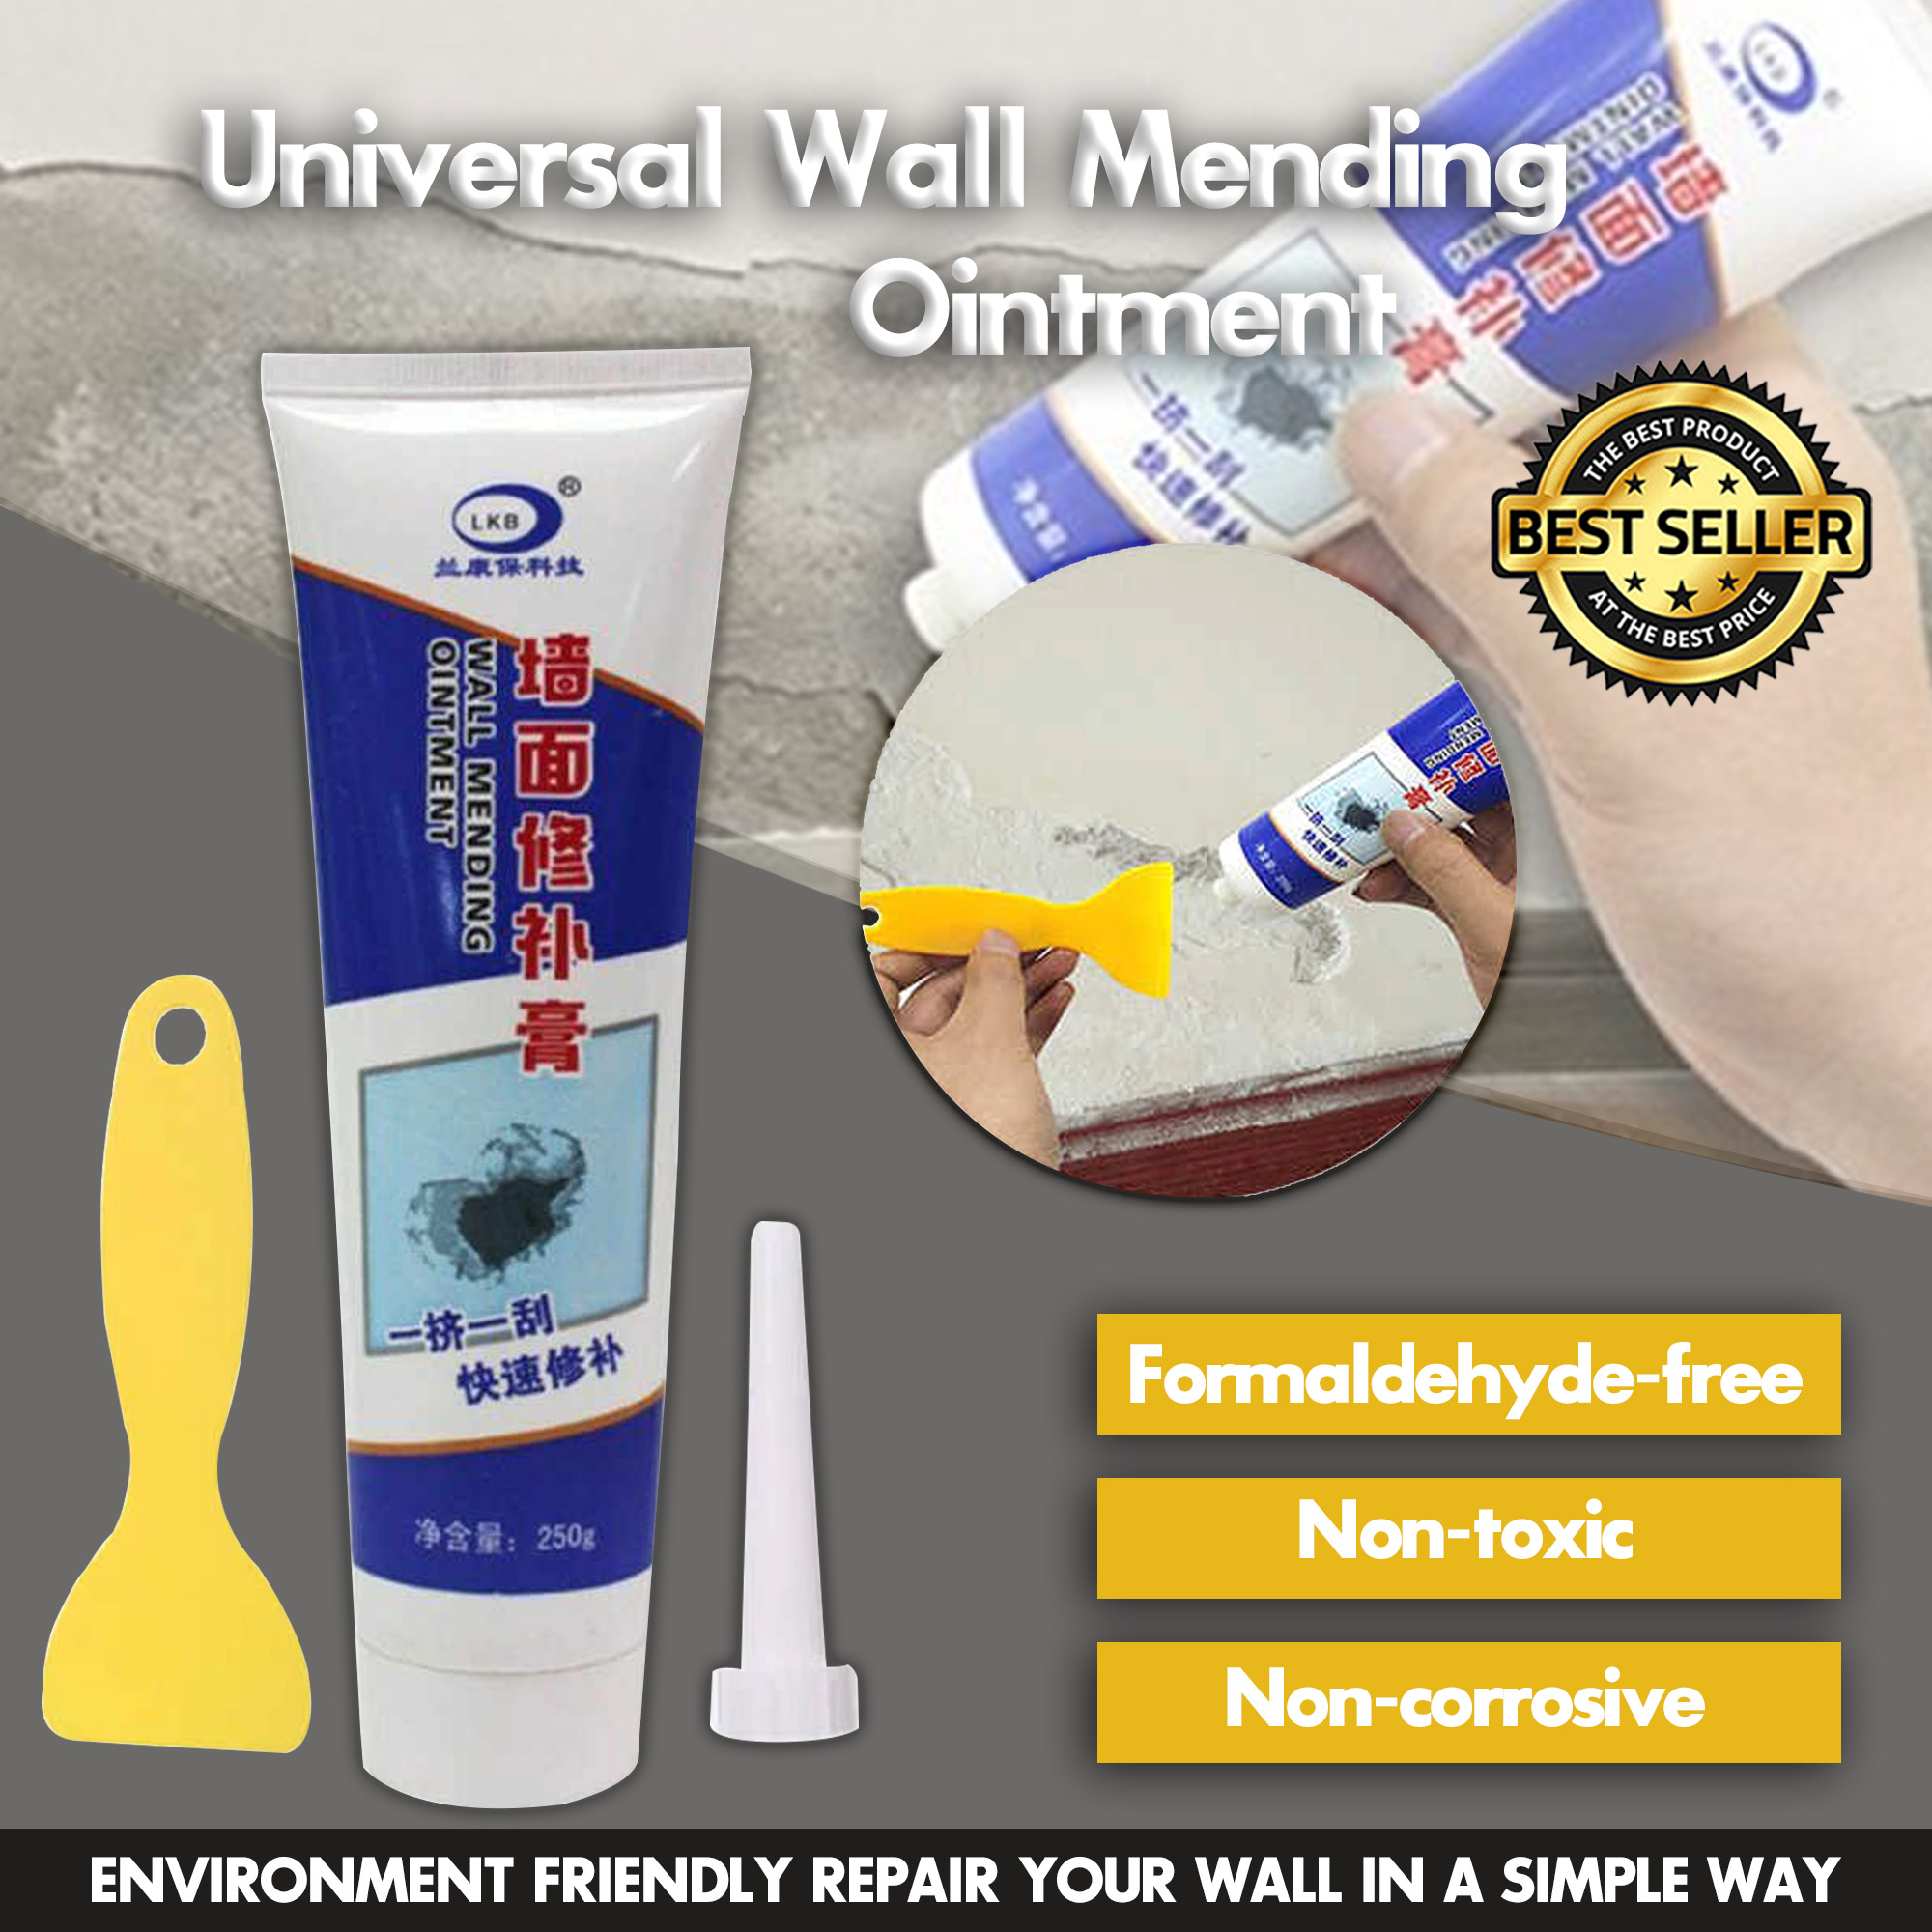 Wall Fix Wall Repair Cream Universal Mending Ointment Grouts Sealant Wall Tool 